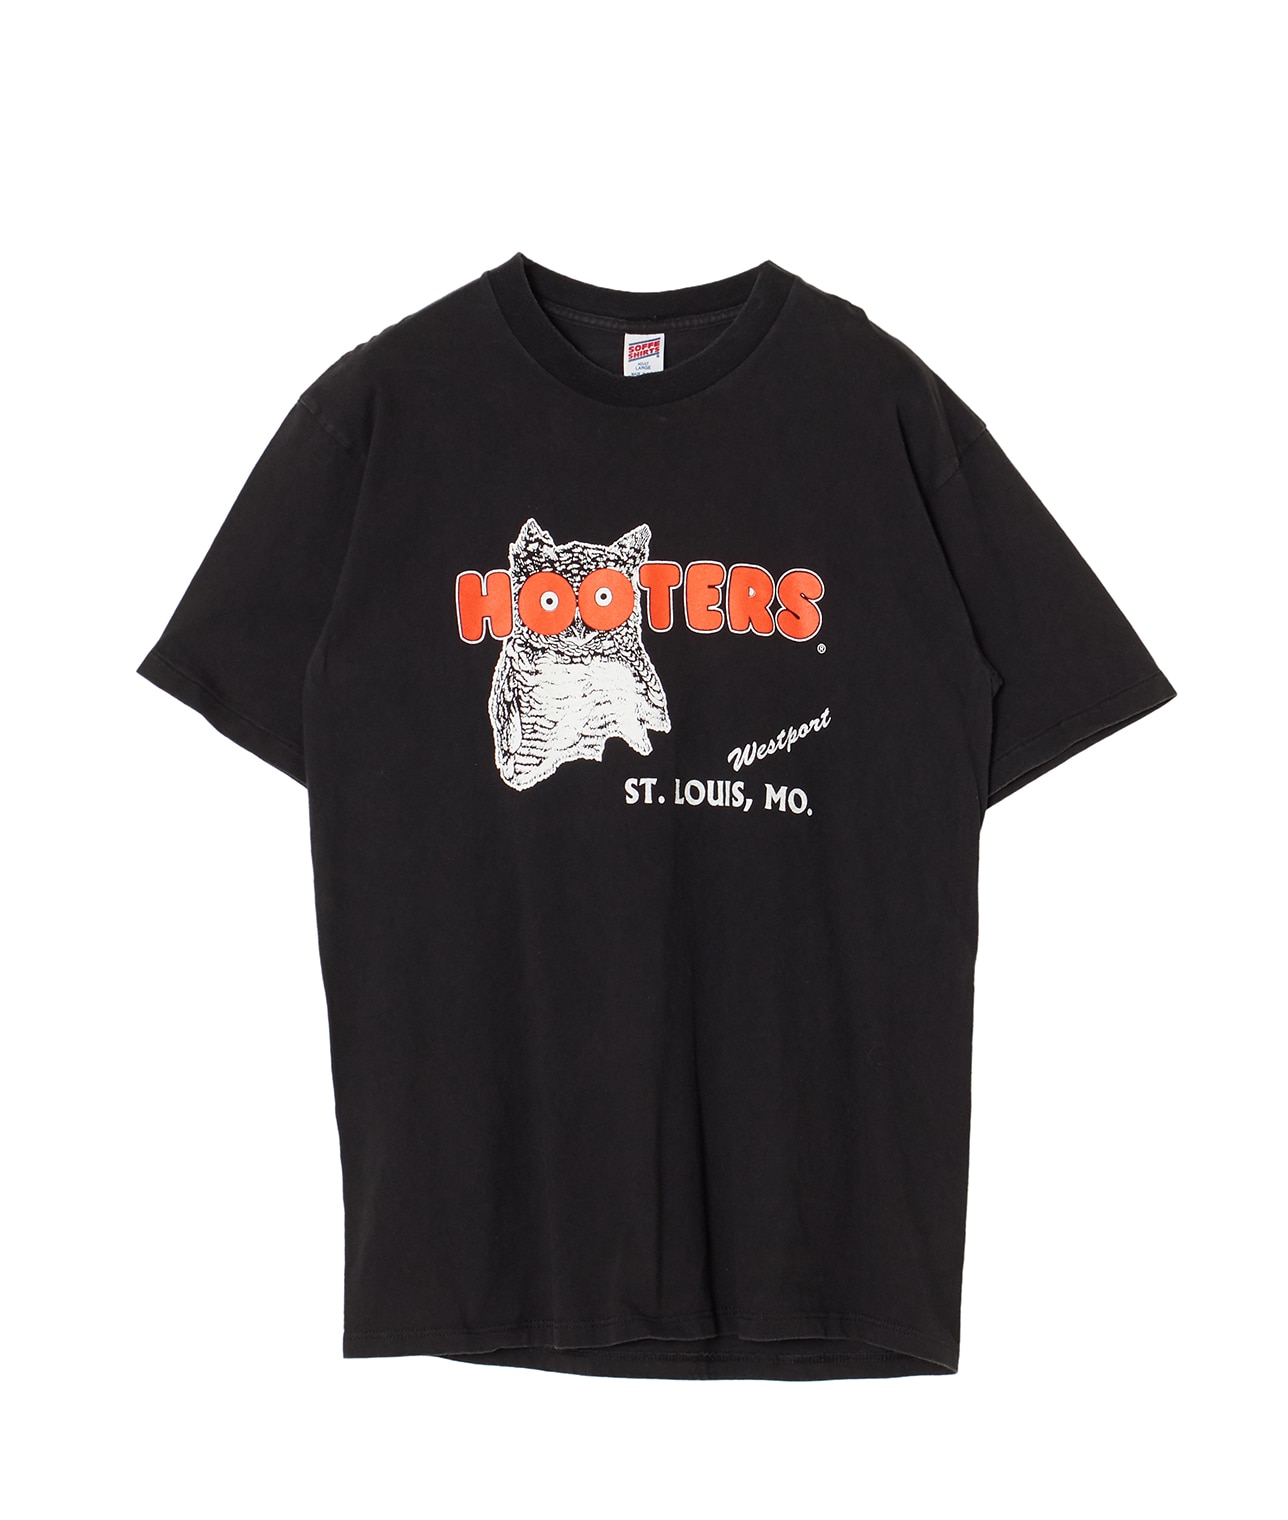 USED/80-90's HOOTERS T SHIRT 詳細画像 ブラック 1